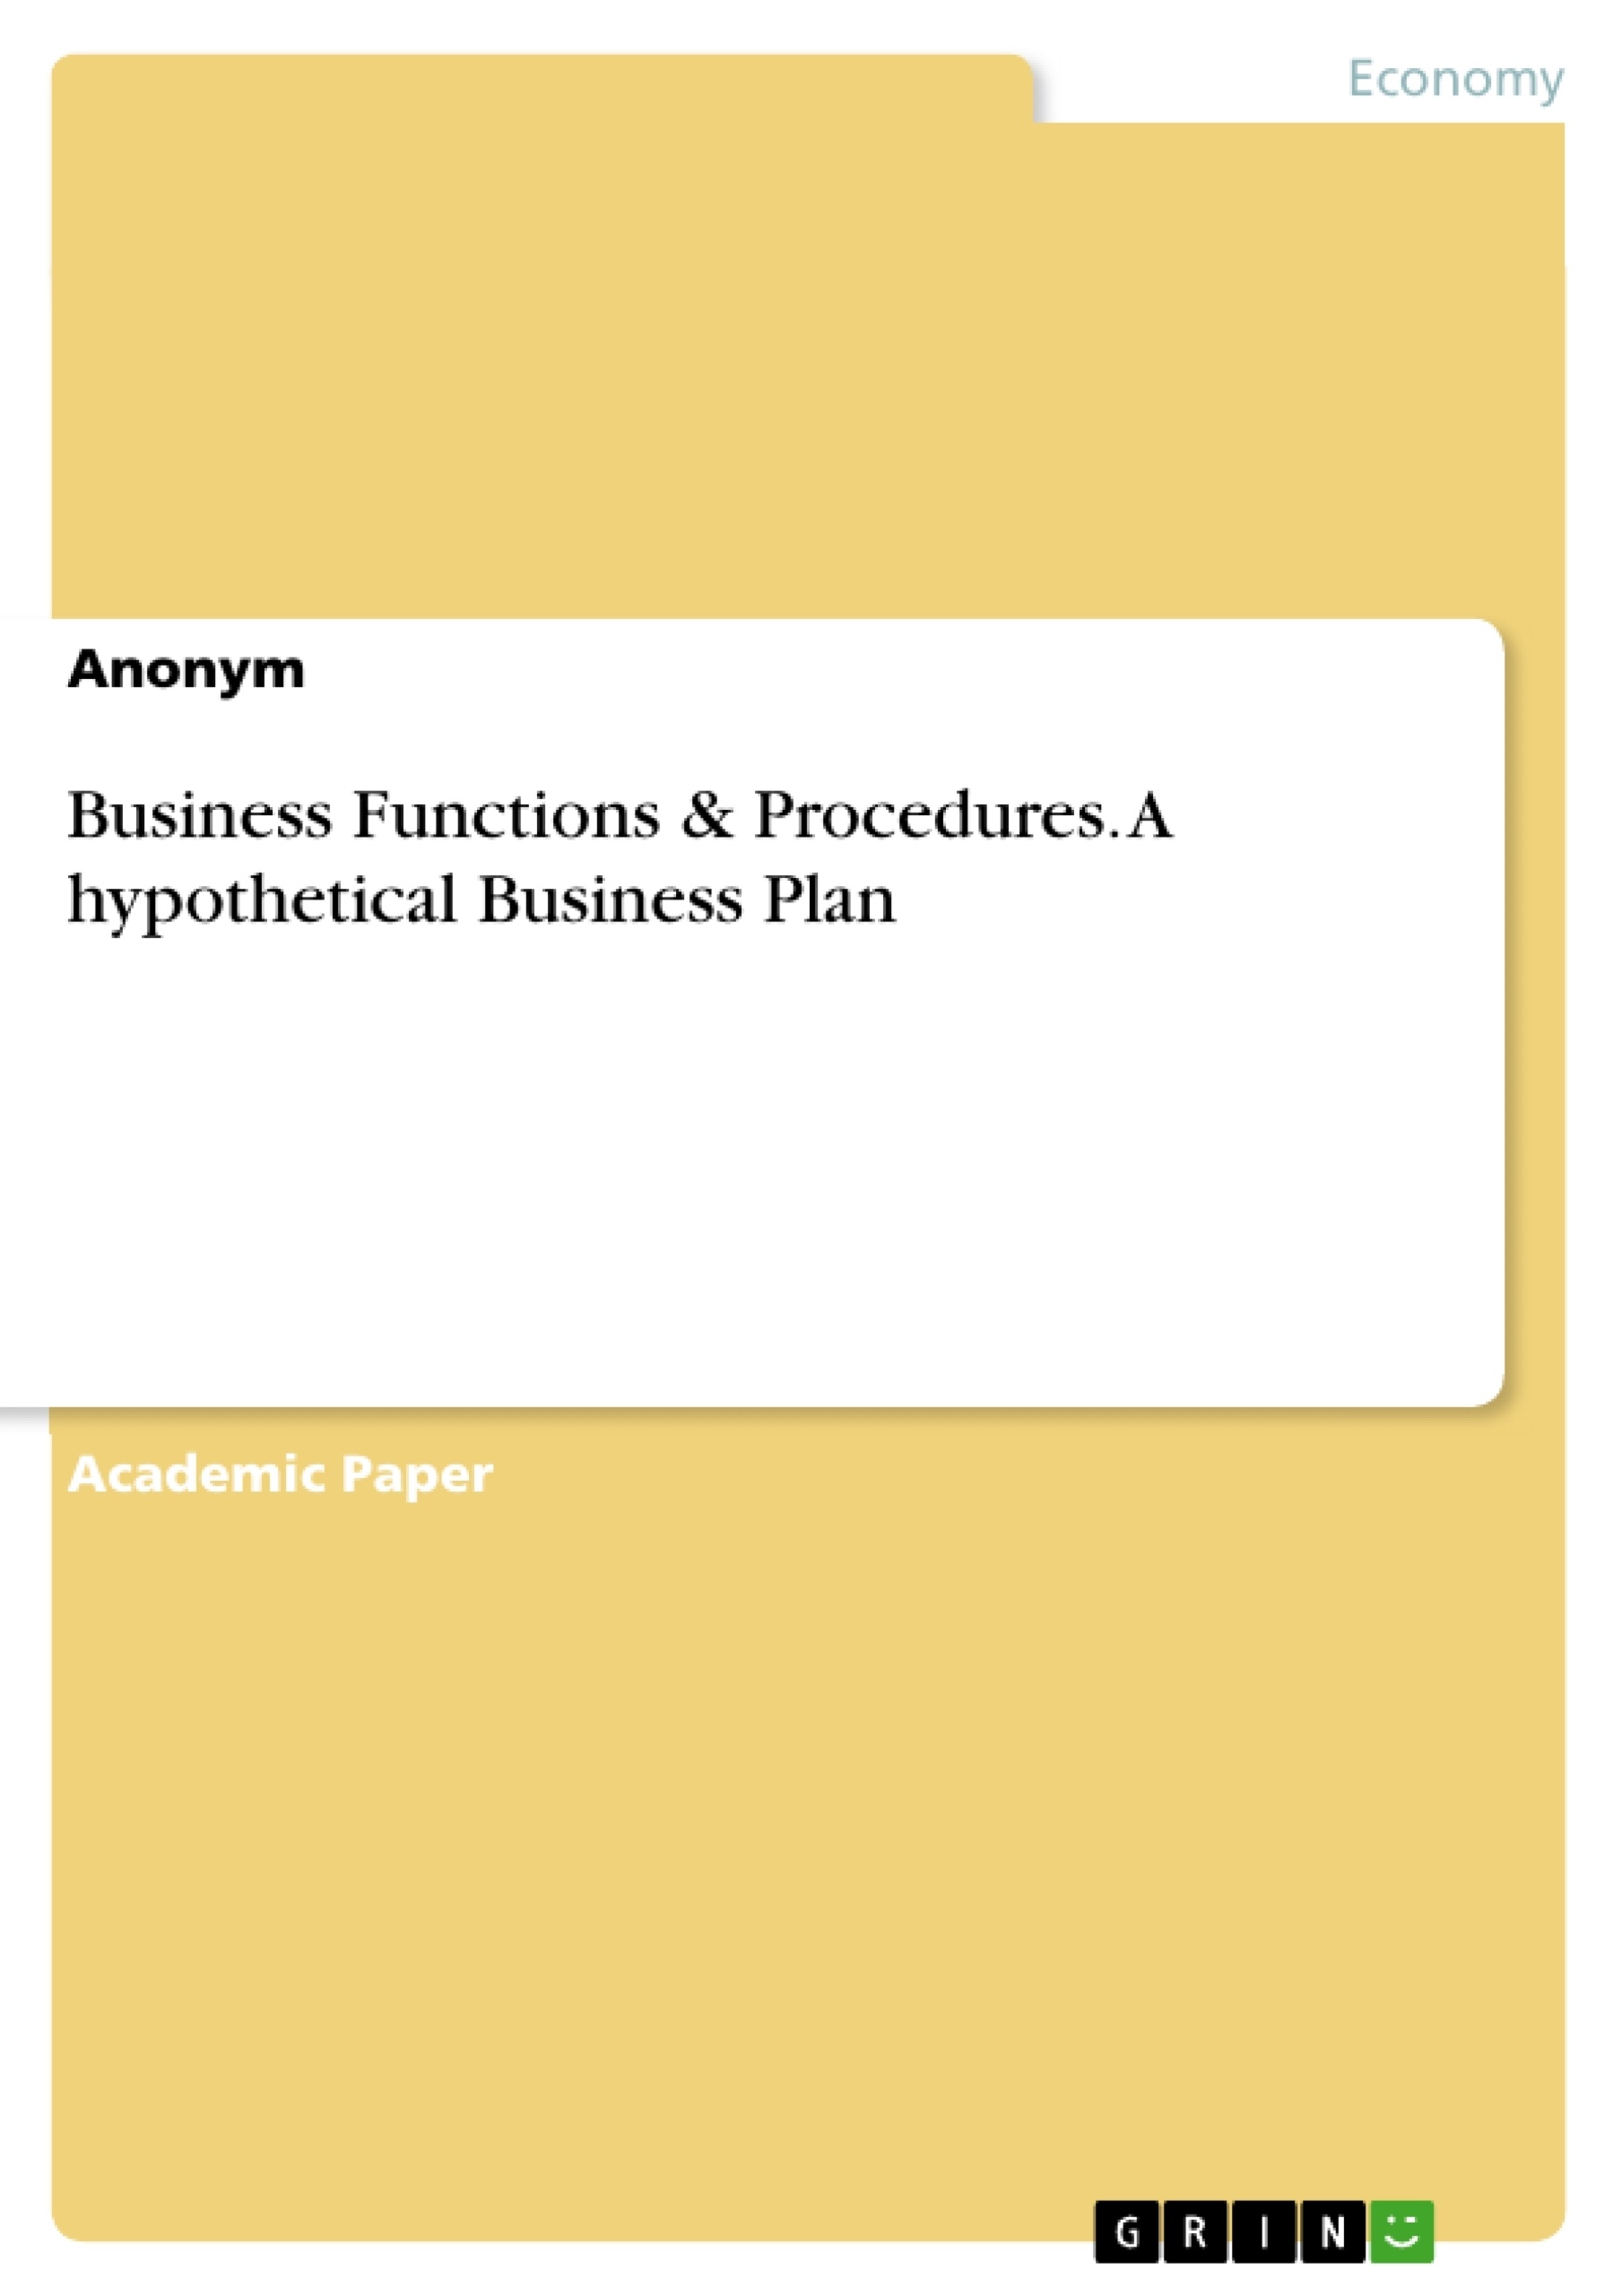 Title: Business Functions & Procedures. A hypothetical Business Plan